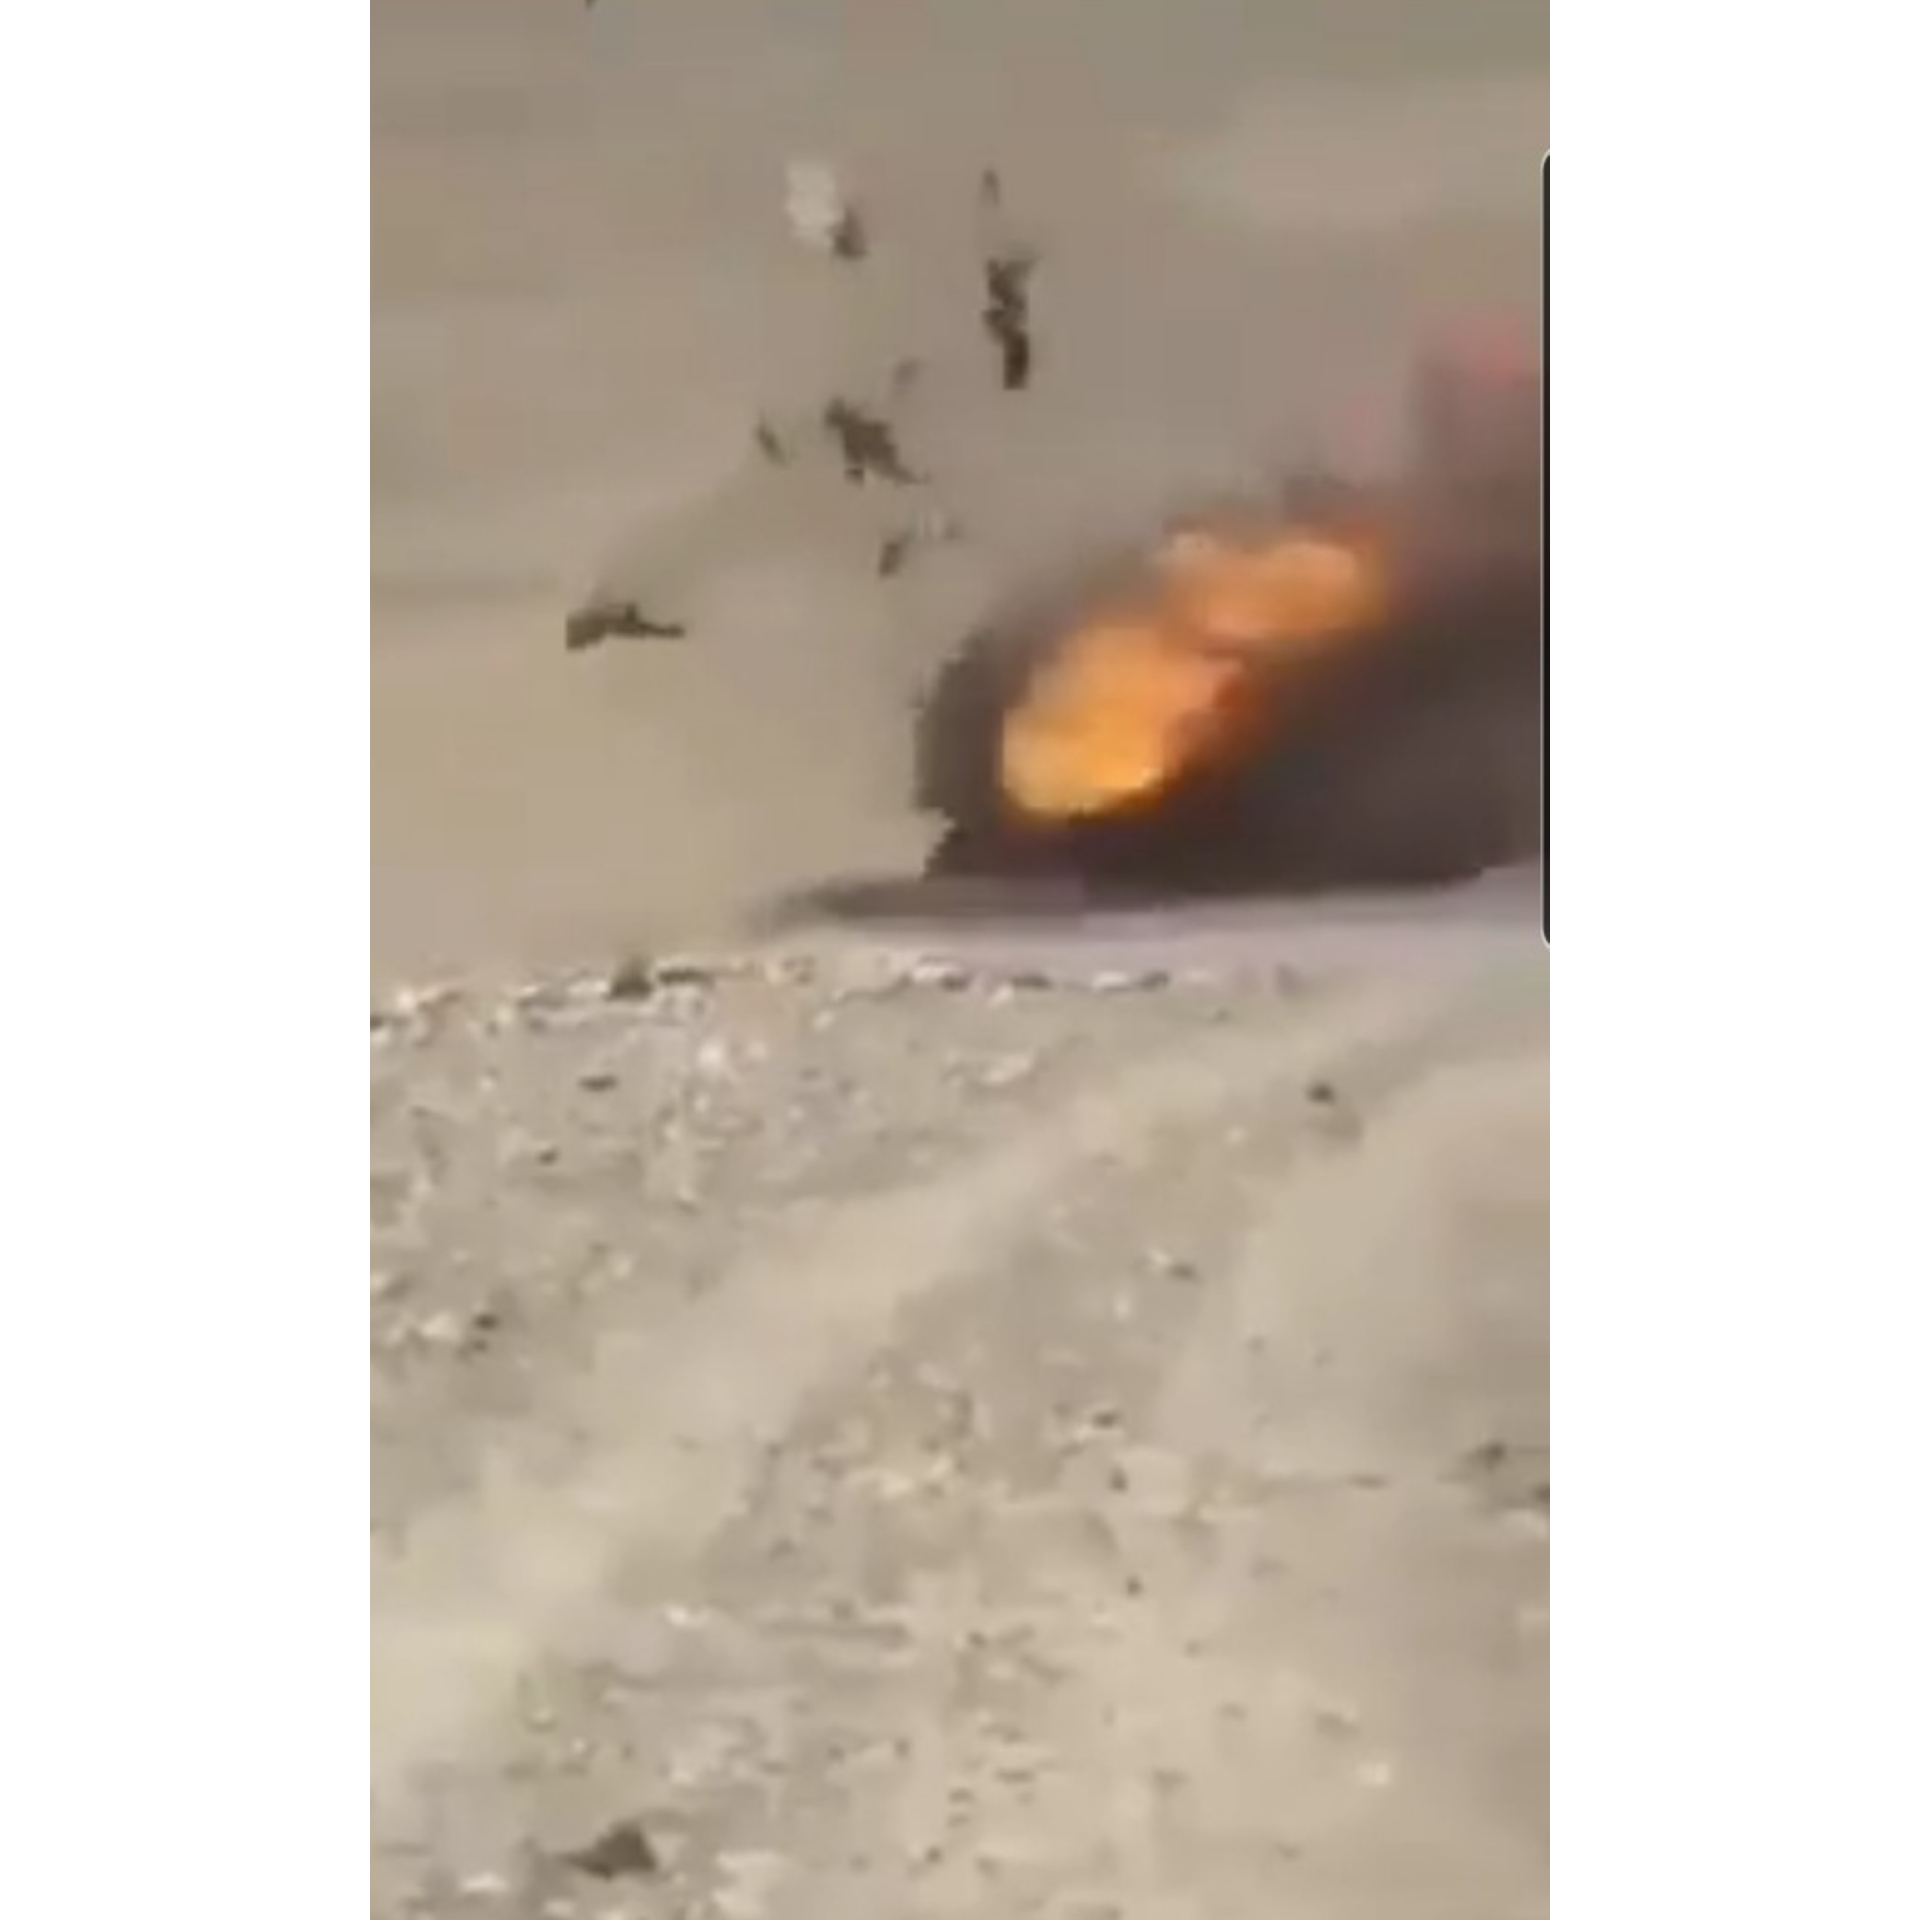 Army vehicle full of soldiers blown up.